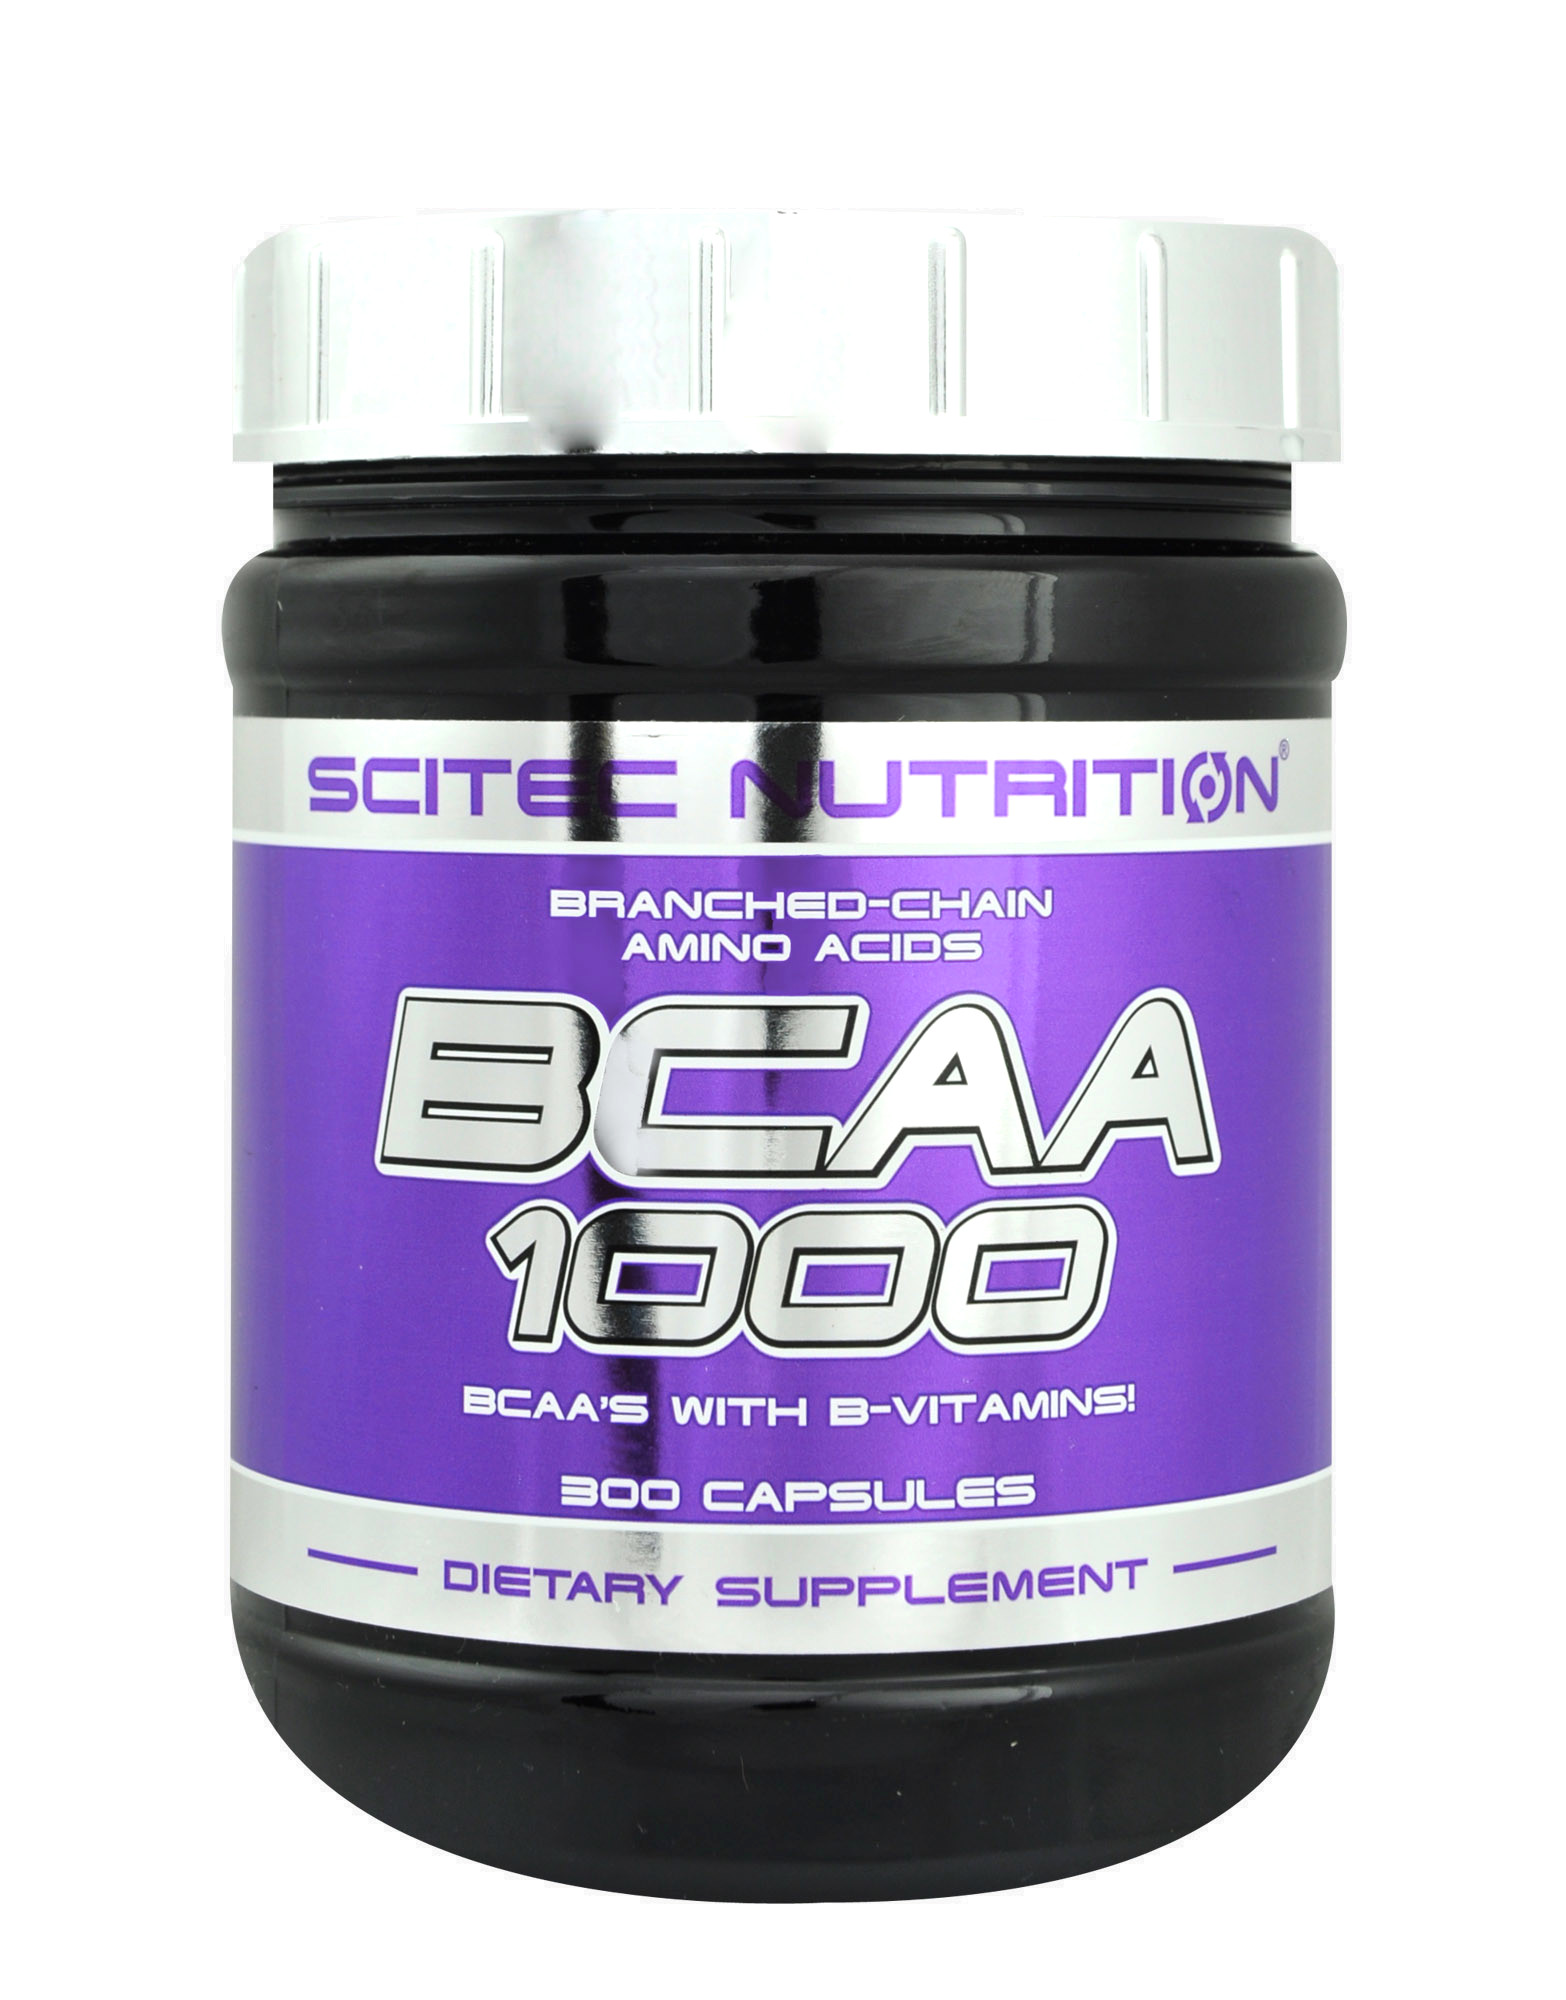 bcaa-1000-by-scitec-nutrition-300-capsules-27-56